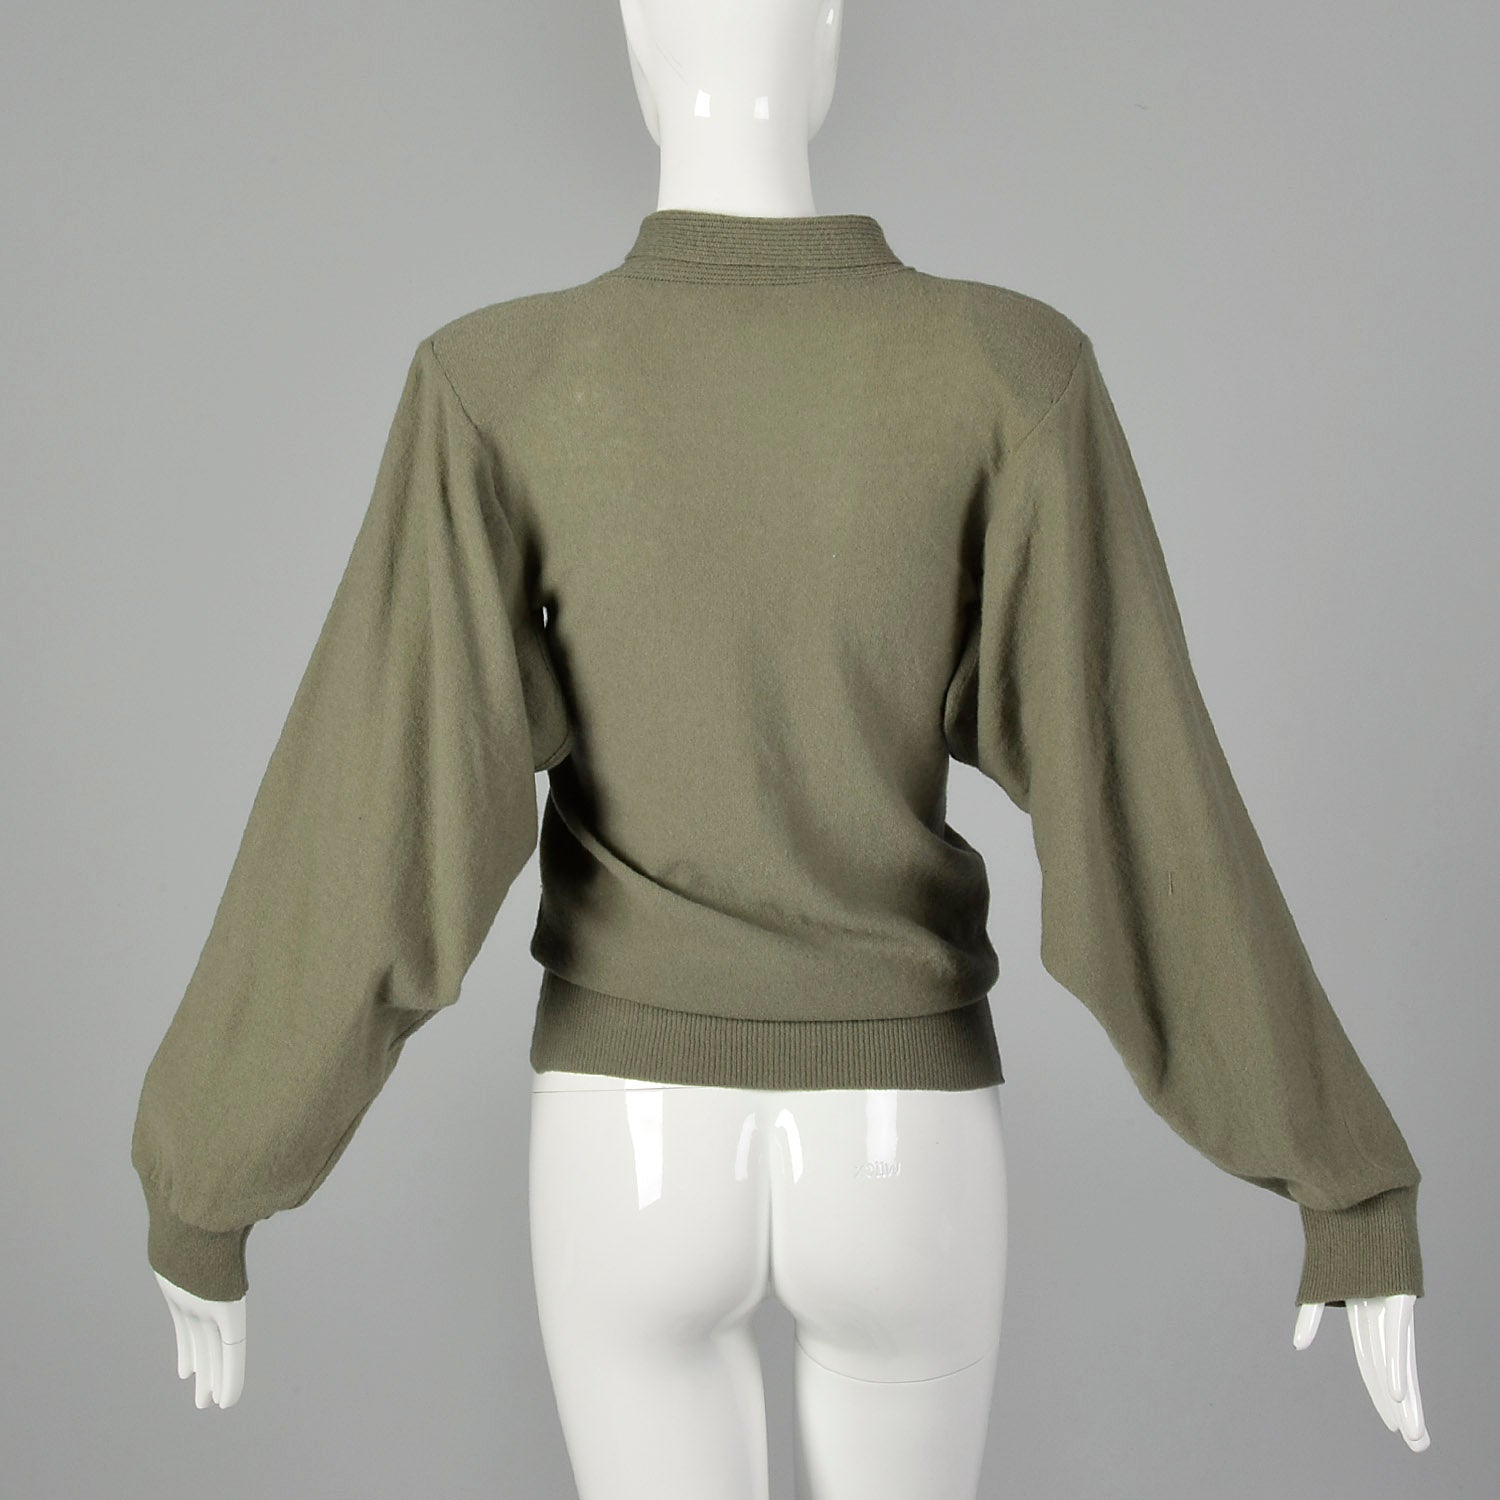 Medium 1980s Green Sweater with Vented Open Armpits